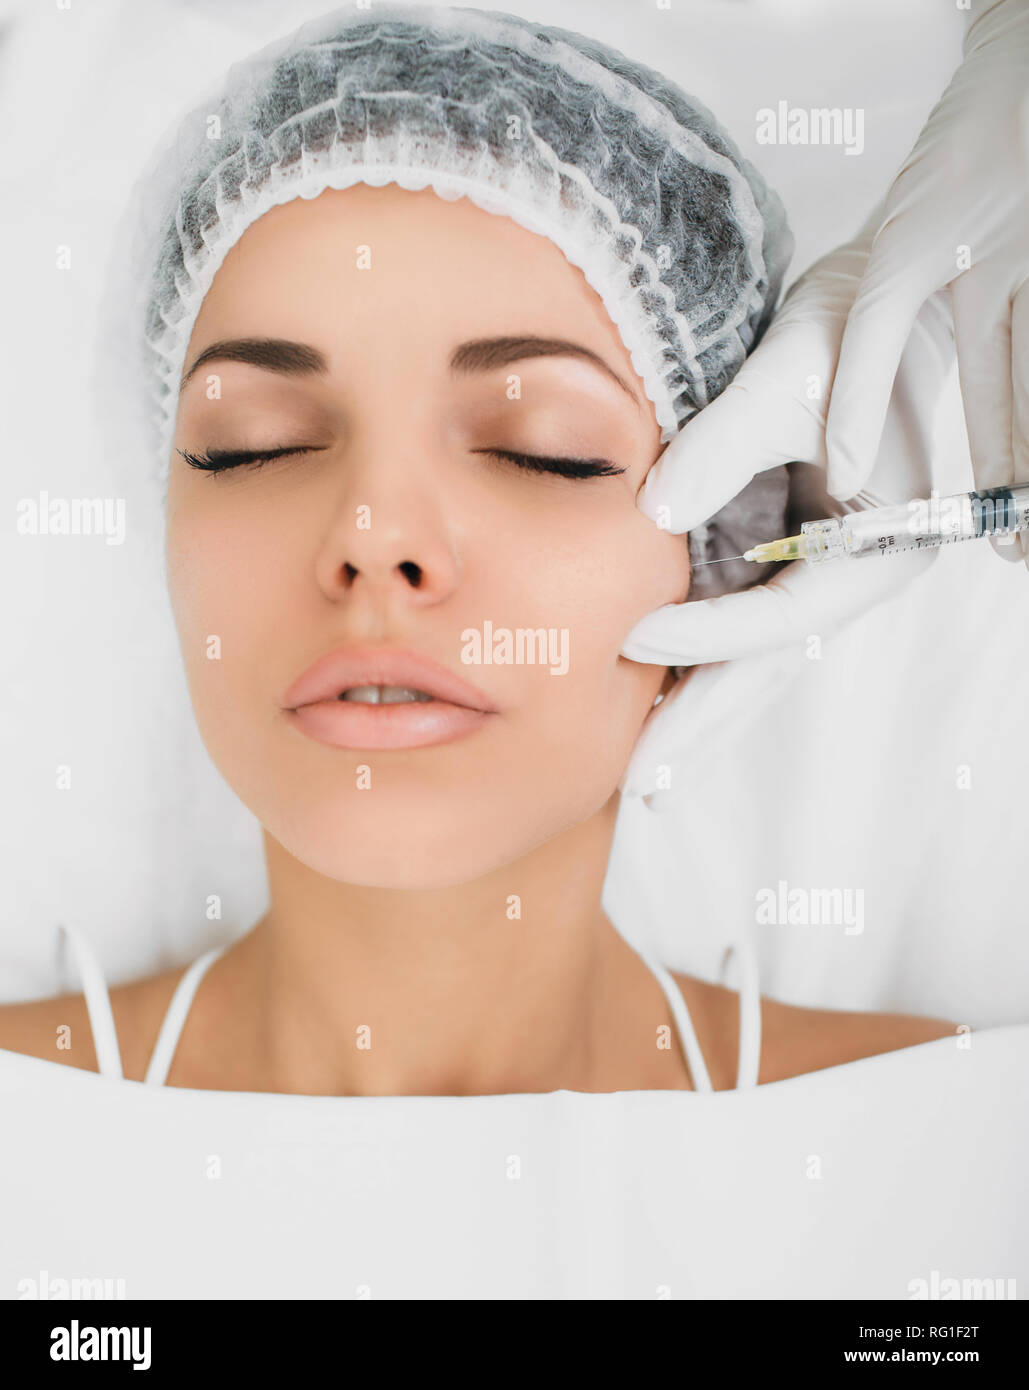 botulinum toxin injection into face, for lifting skin . Face injection top view Stock Photo